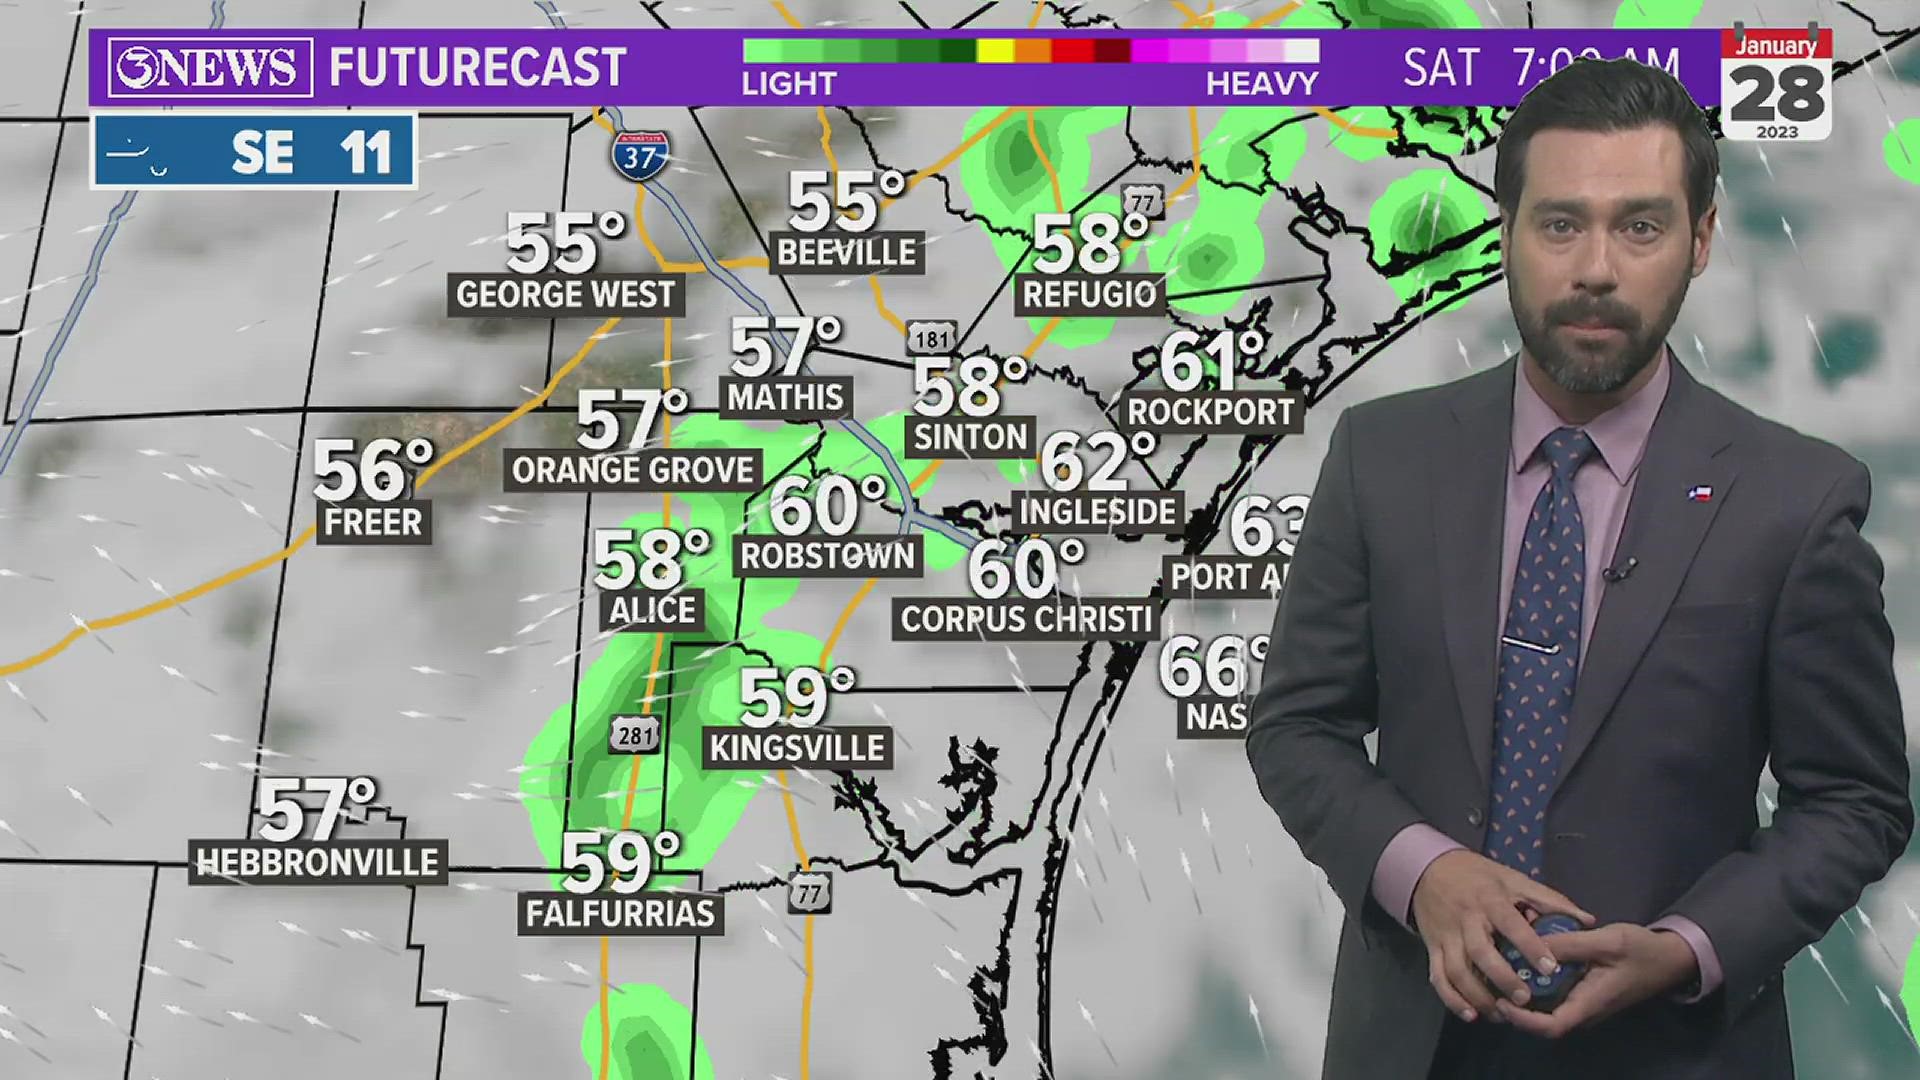 Patchy rain and milder for Saturday. We'll make a run at 80 on Sunday. Forecast becomes unsettled/murky into next week.